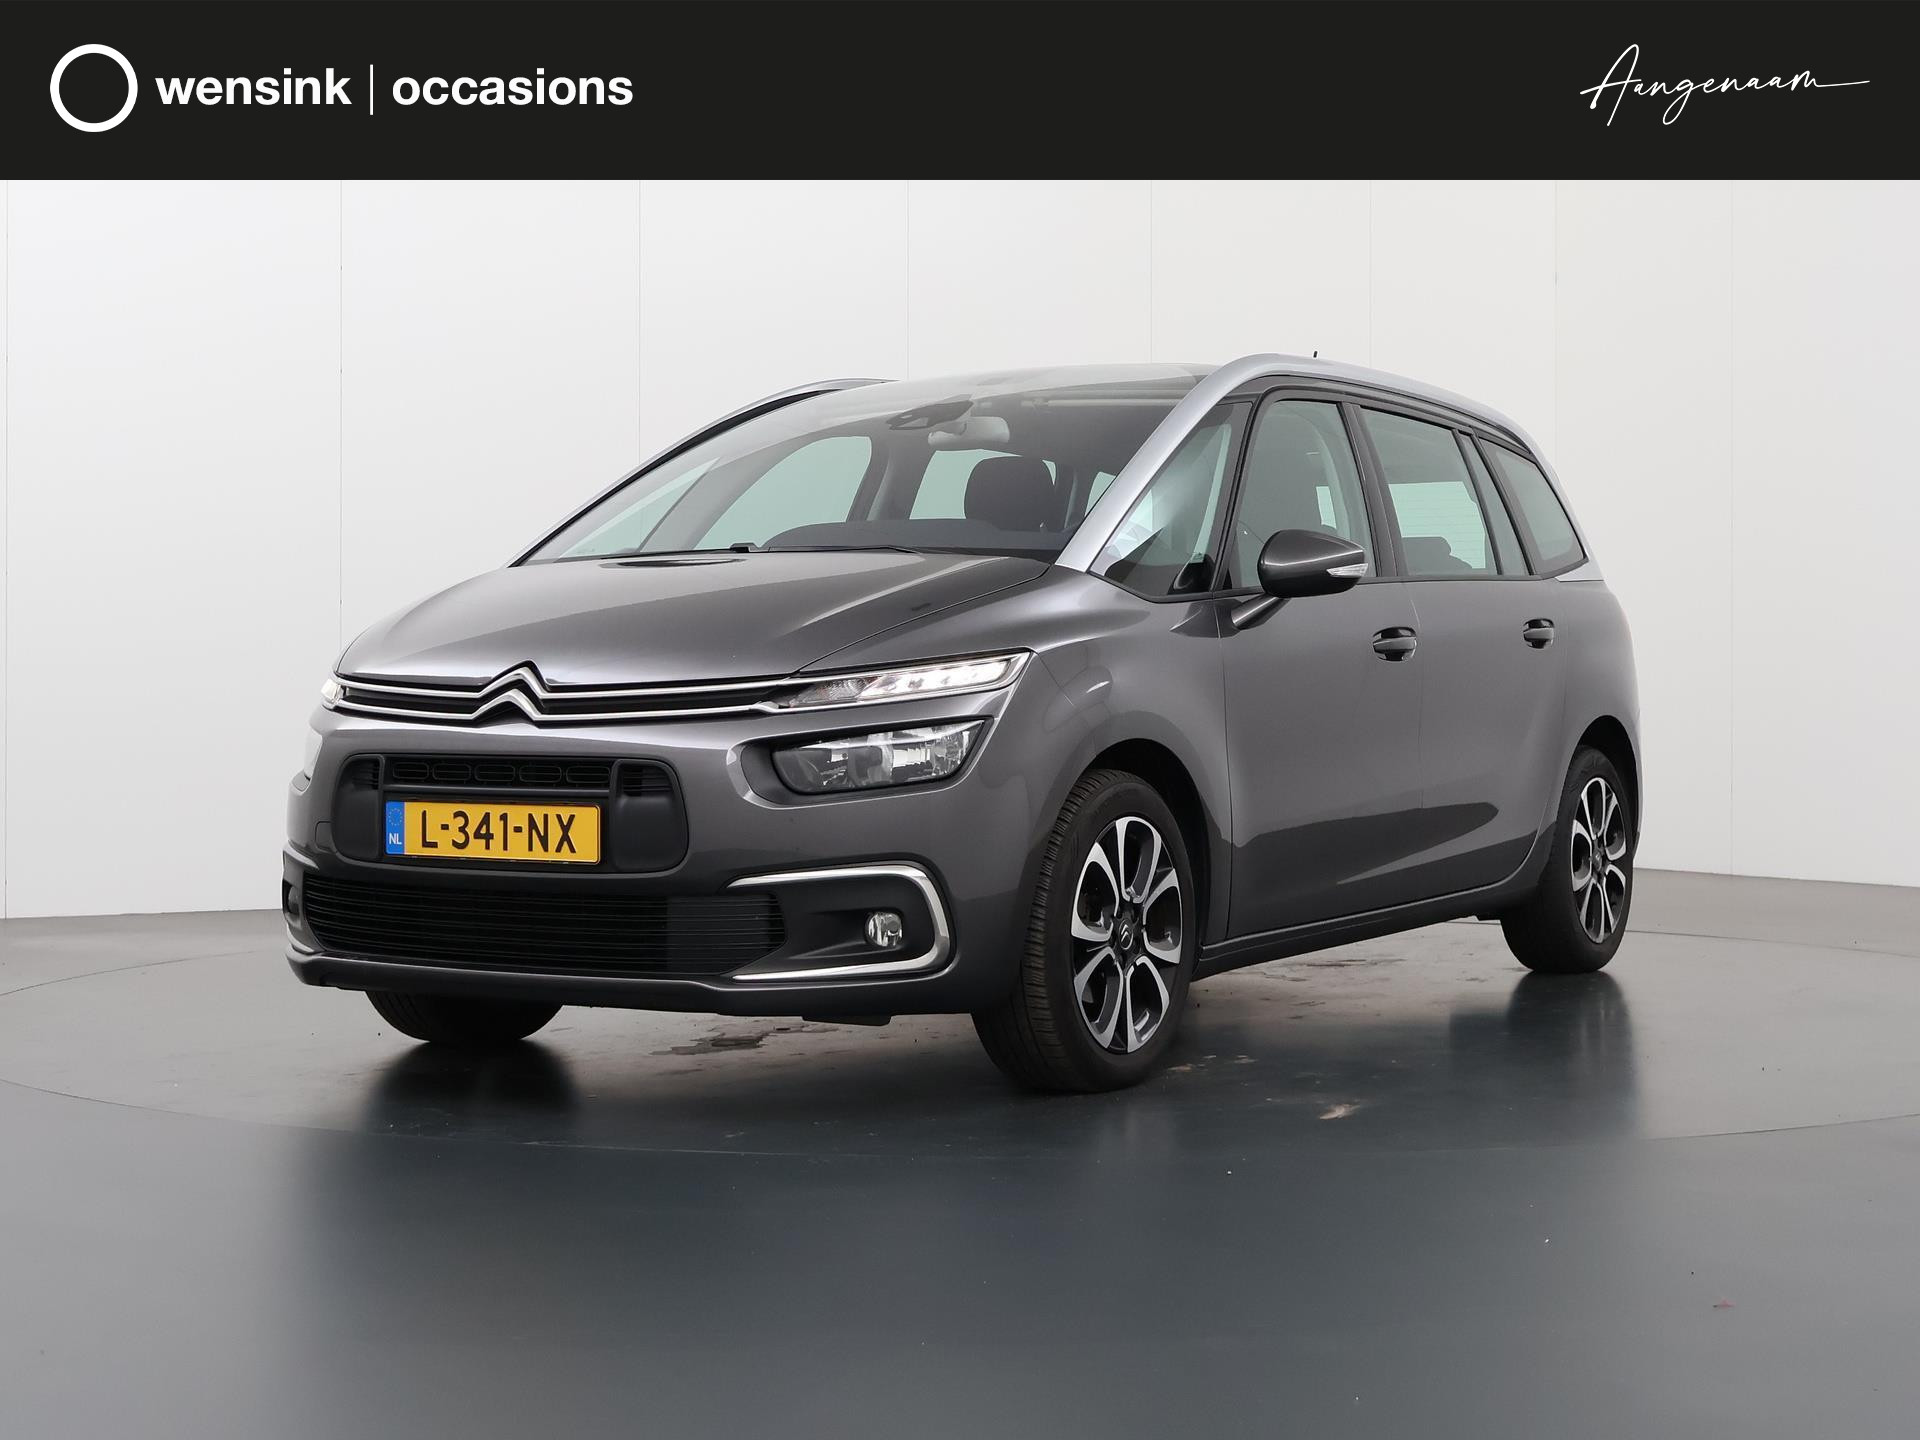 Citroen Grand C4 SpaceTourer 1.2 PureTech Business | 7 Persoons | Automaat | Navigatiesysteem | Achteruitrijcamera | Cruise Control | Climate Control | Apple Carplay/Android Auto | bij viaBOVAG.nl